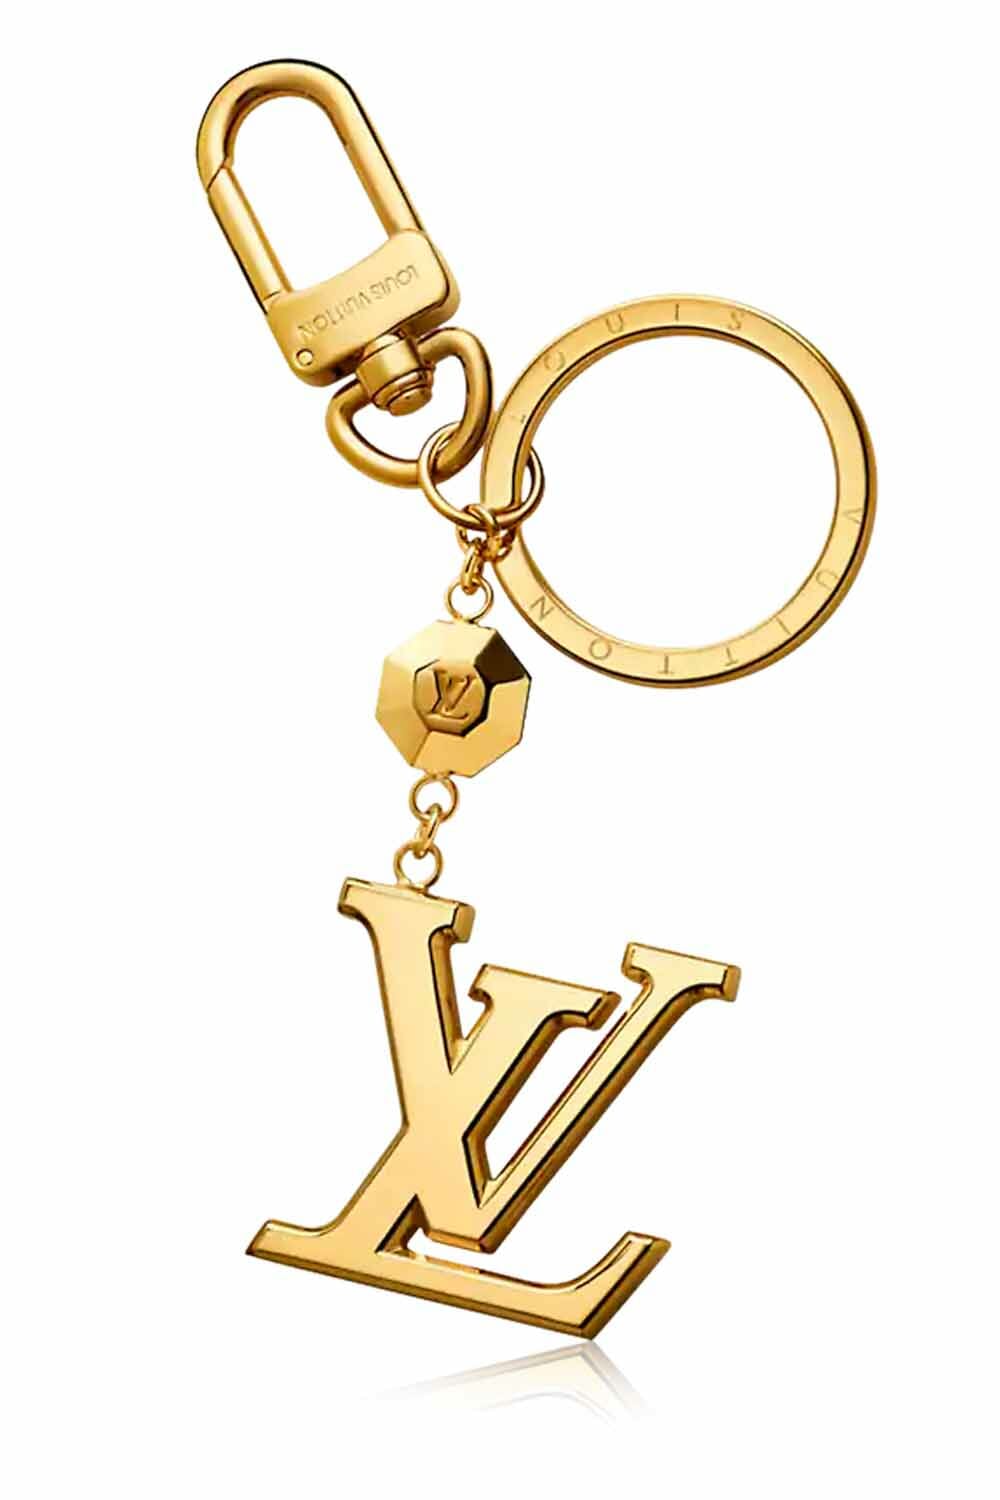 The-best-luxury-gifts-for-her-women-Louis-Vuitton-FACETTES-BAG-CHARM-KEY-HOLDER